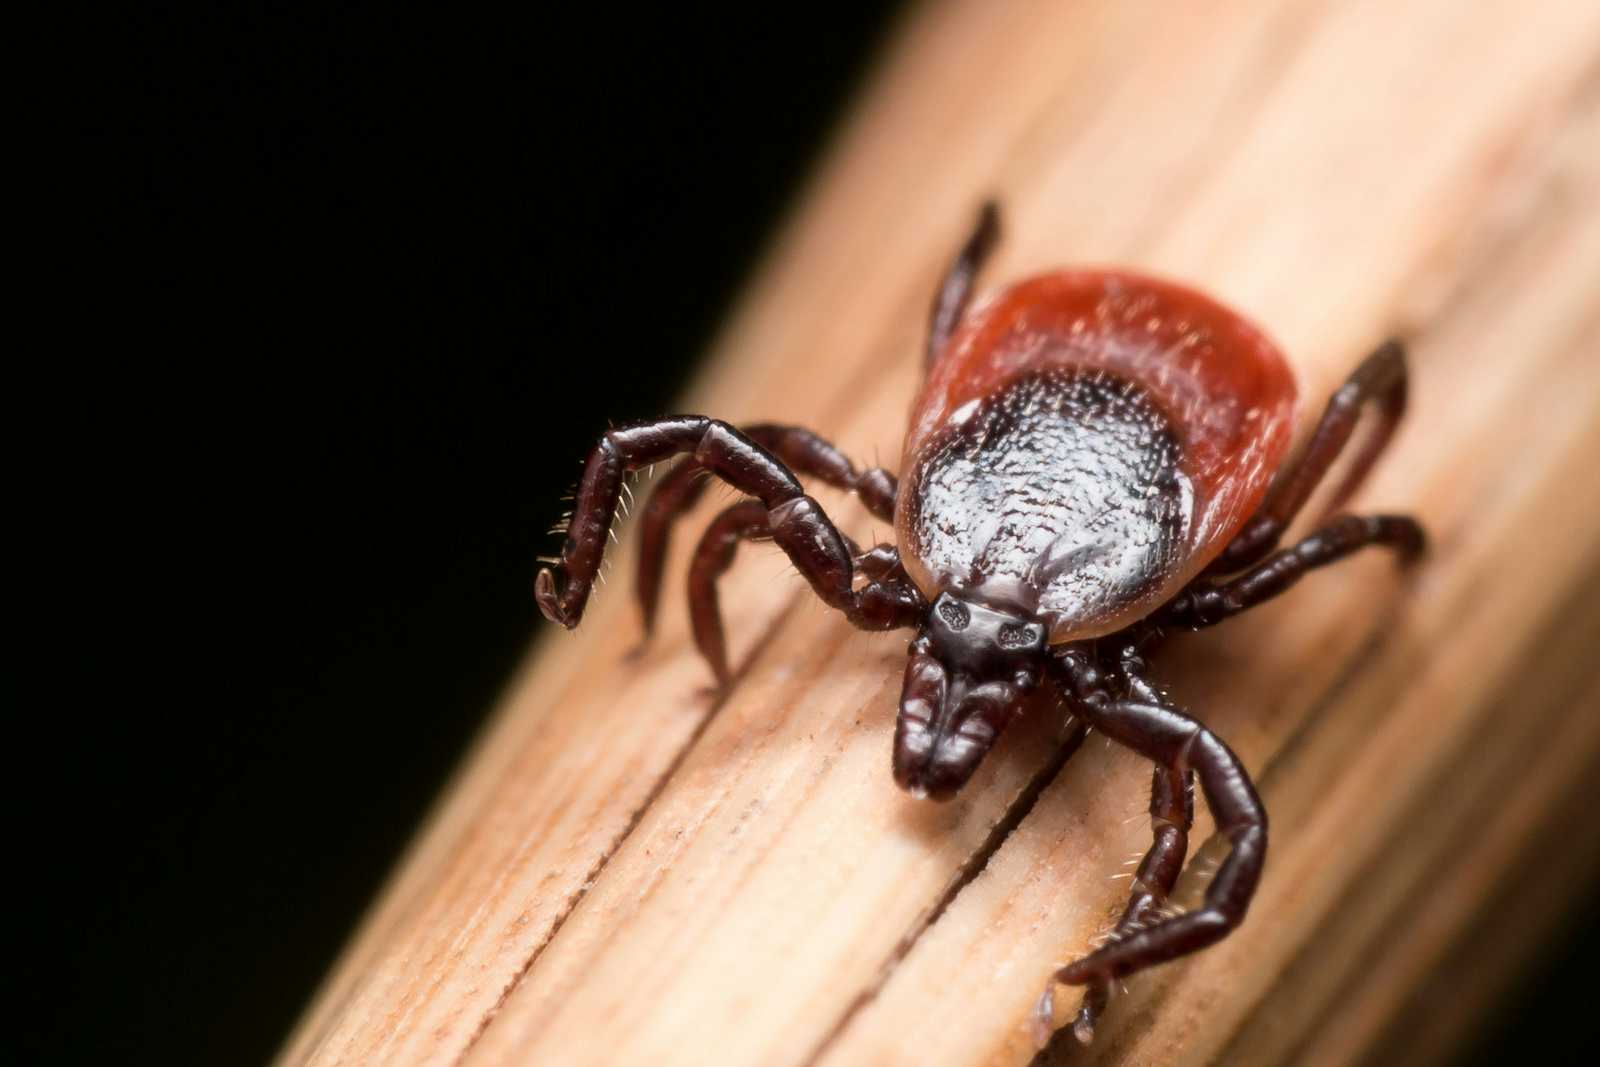 Adult female deer tick crawling on piece of straw. Preventing tick bites is a good approach to avoiding Lyme disease